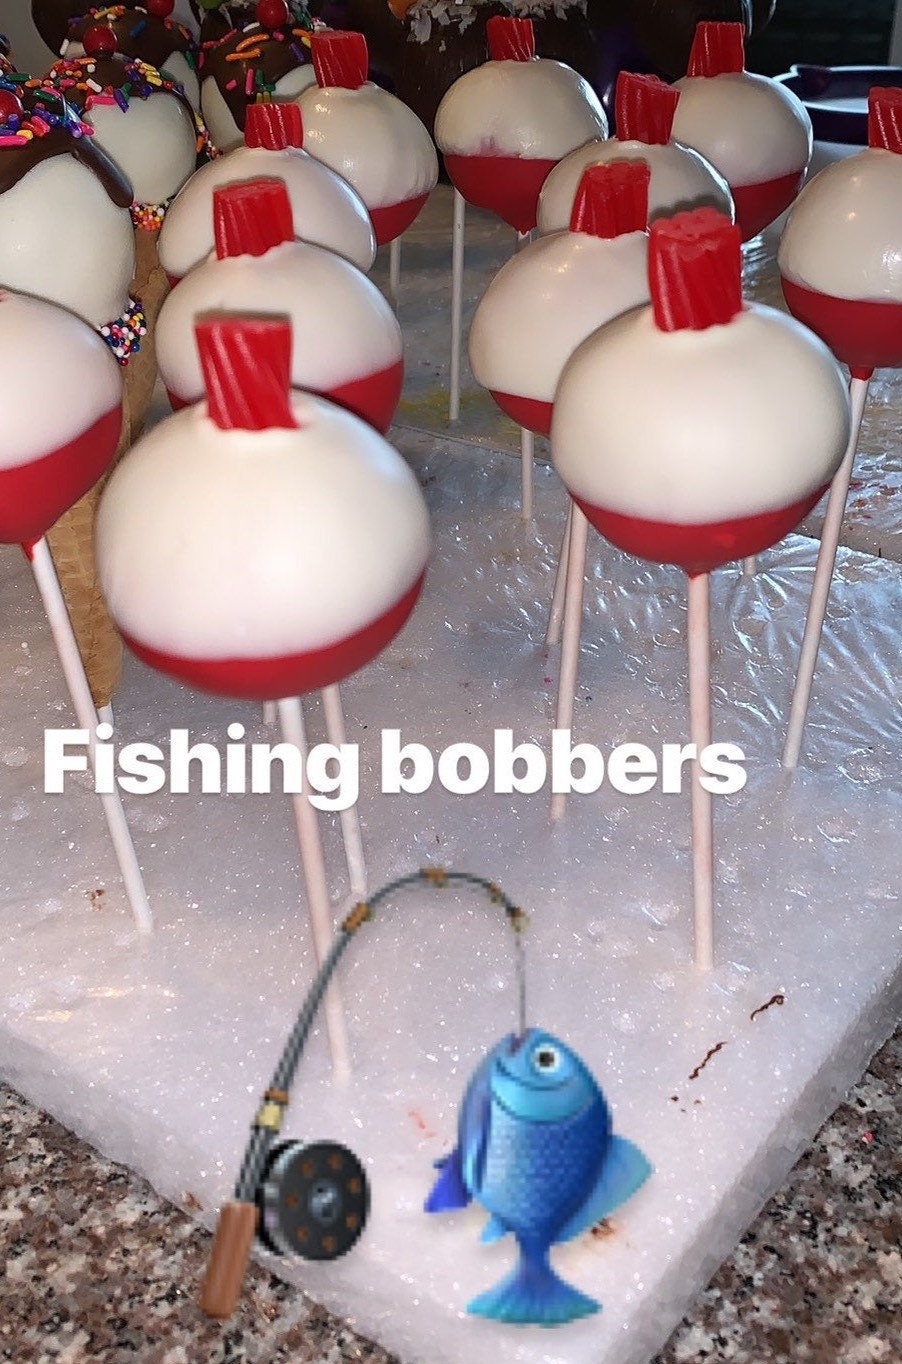 Fruidles Party Fun Variety Fishing Bobber Lollipops Mixed Fruit Flavor Party Suckers Perfect Fisherman Party Favors for Your Fisherman Birthday